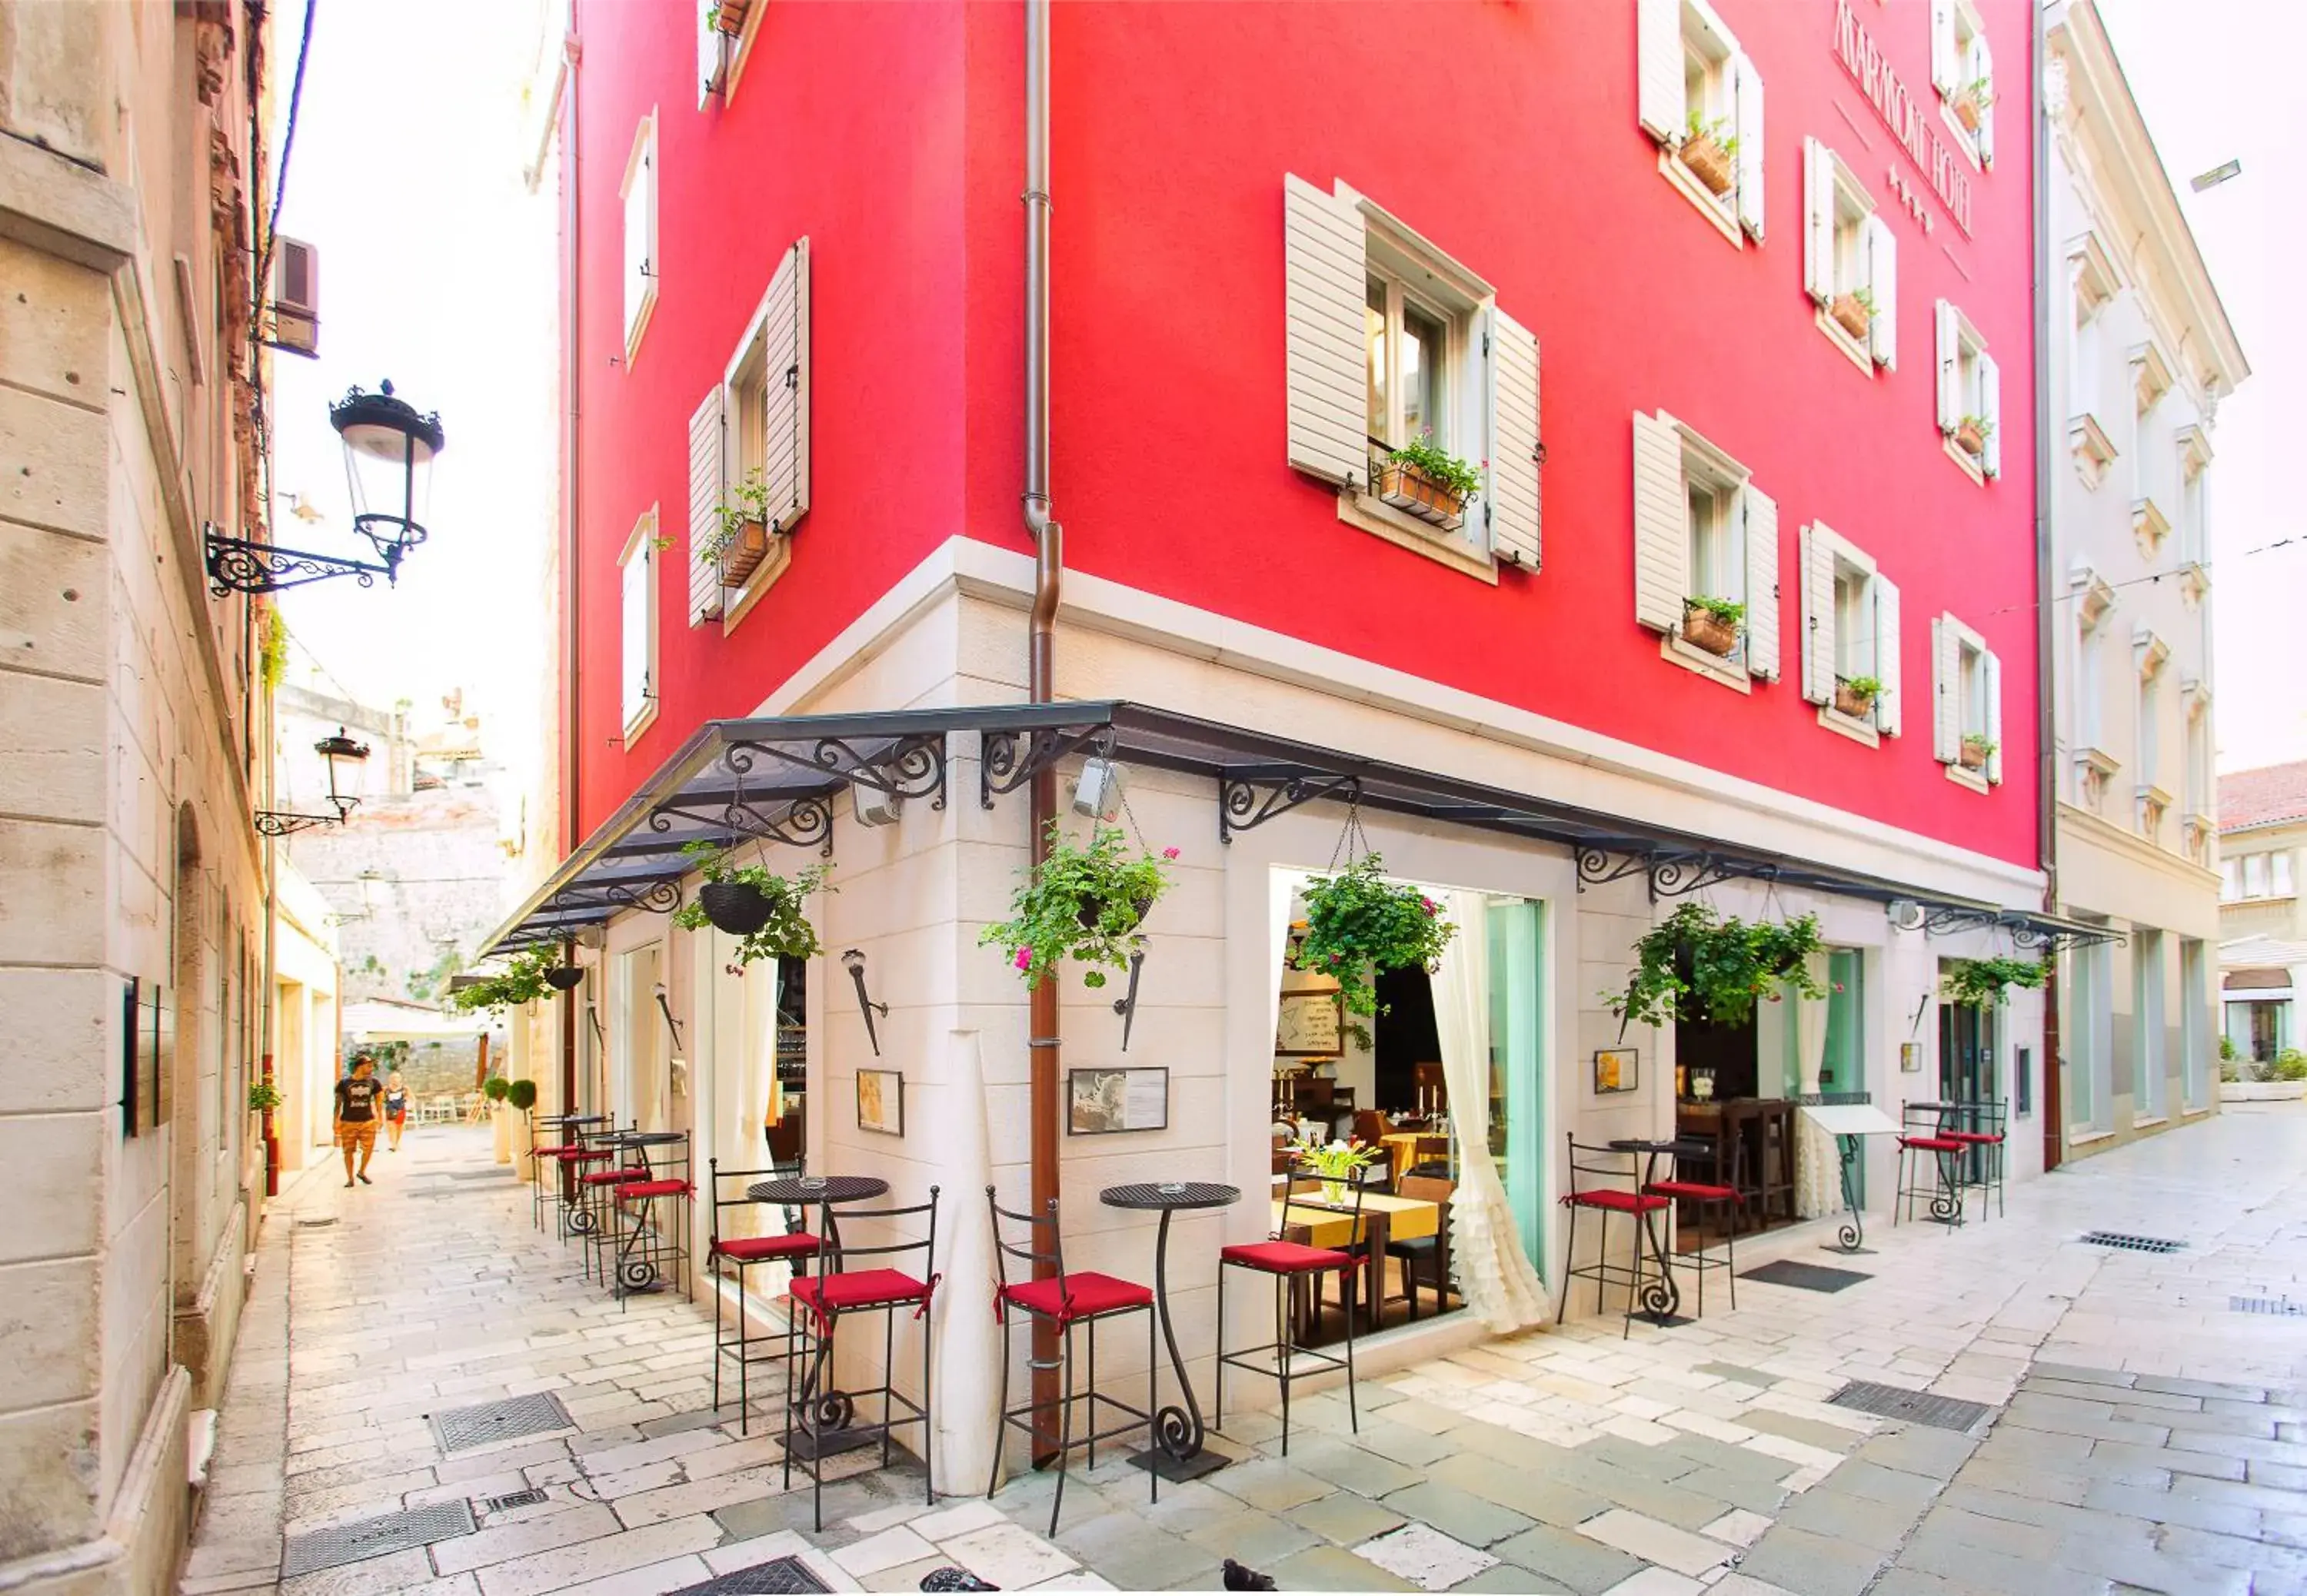 Property building in Hotel Marmont - Adults Only